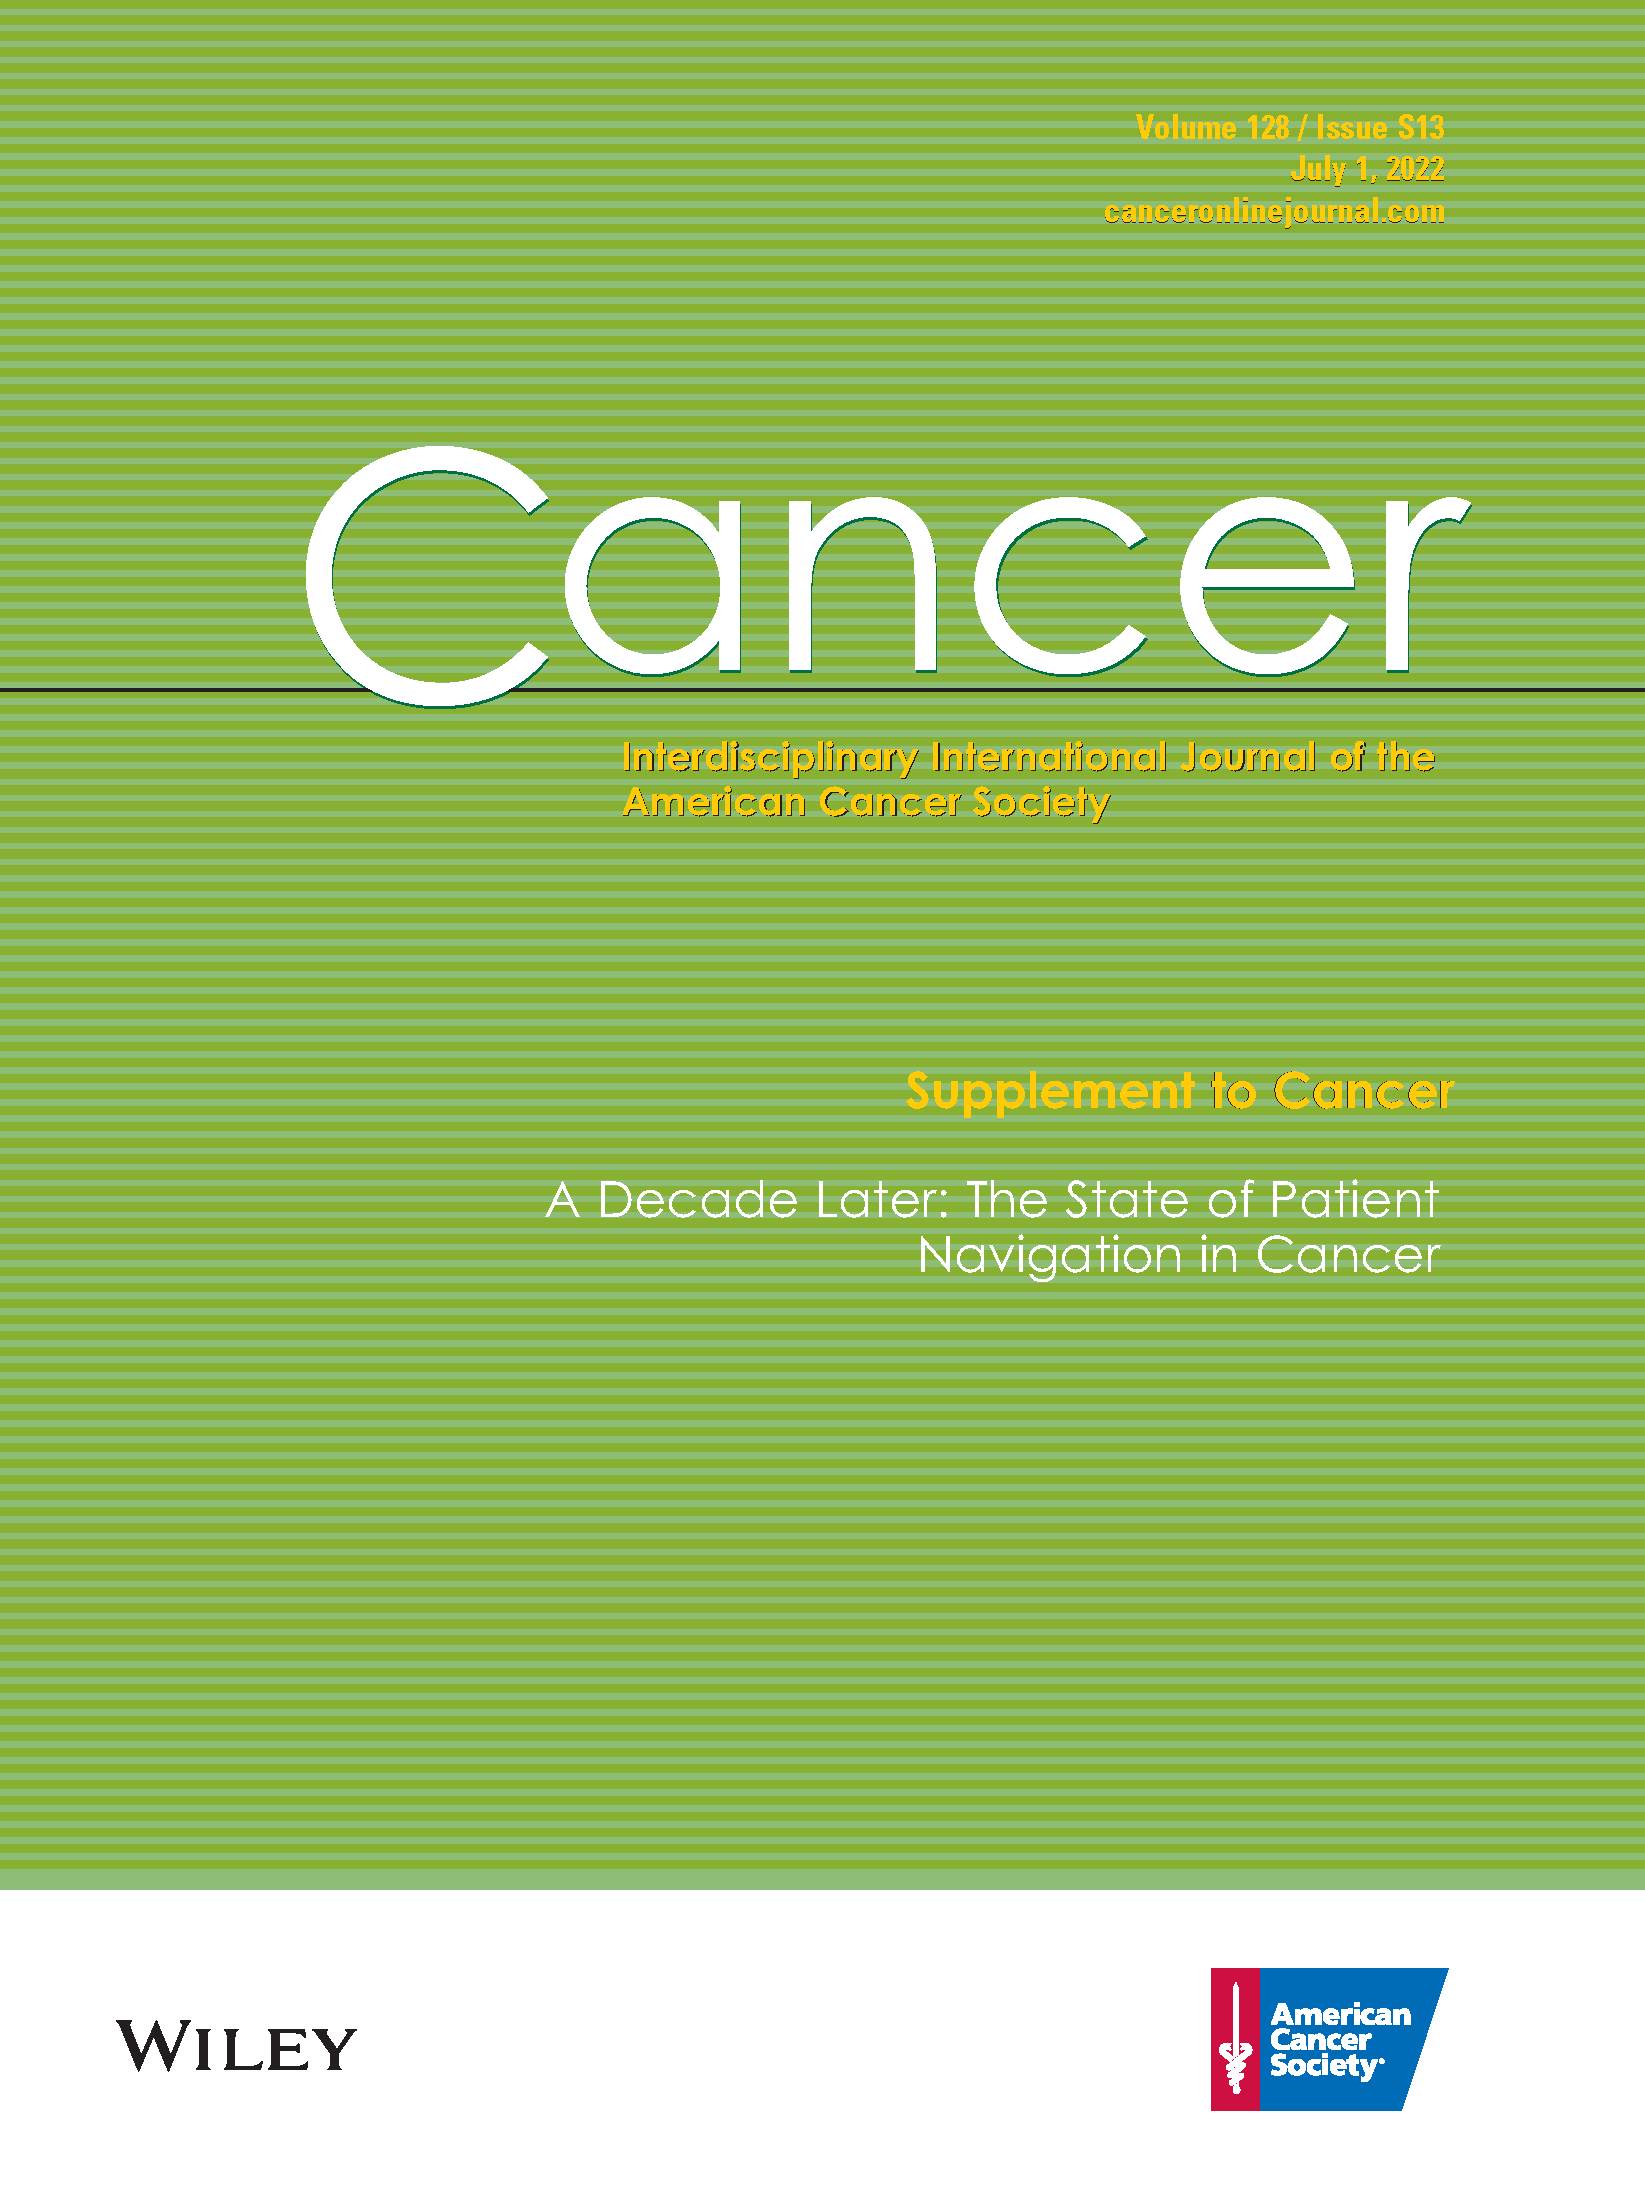 “A Decade Later: The State of Patient Navigation in Cancer Care”